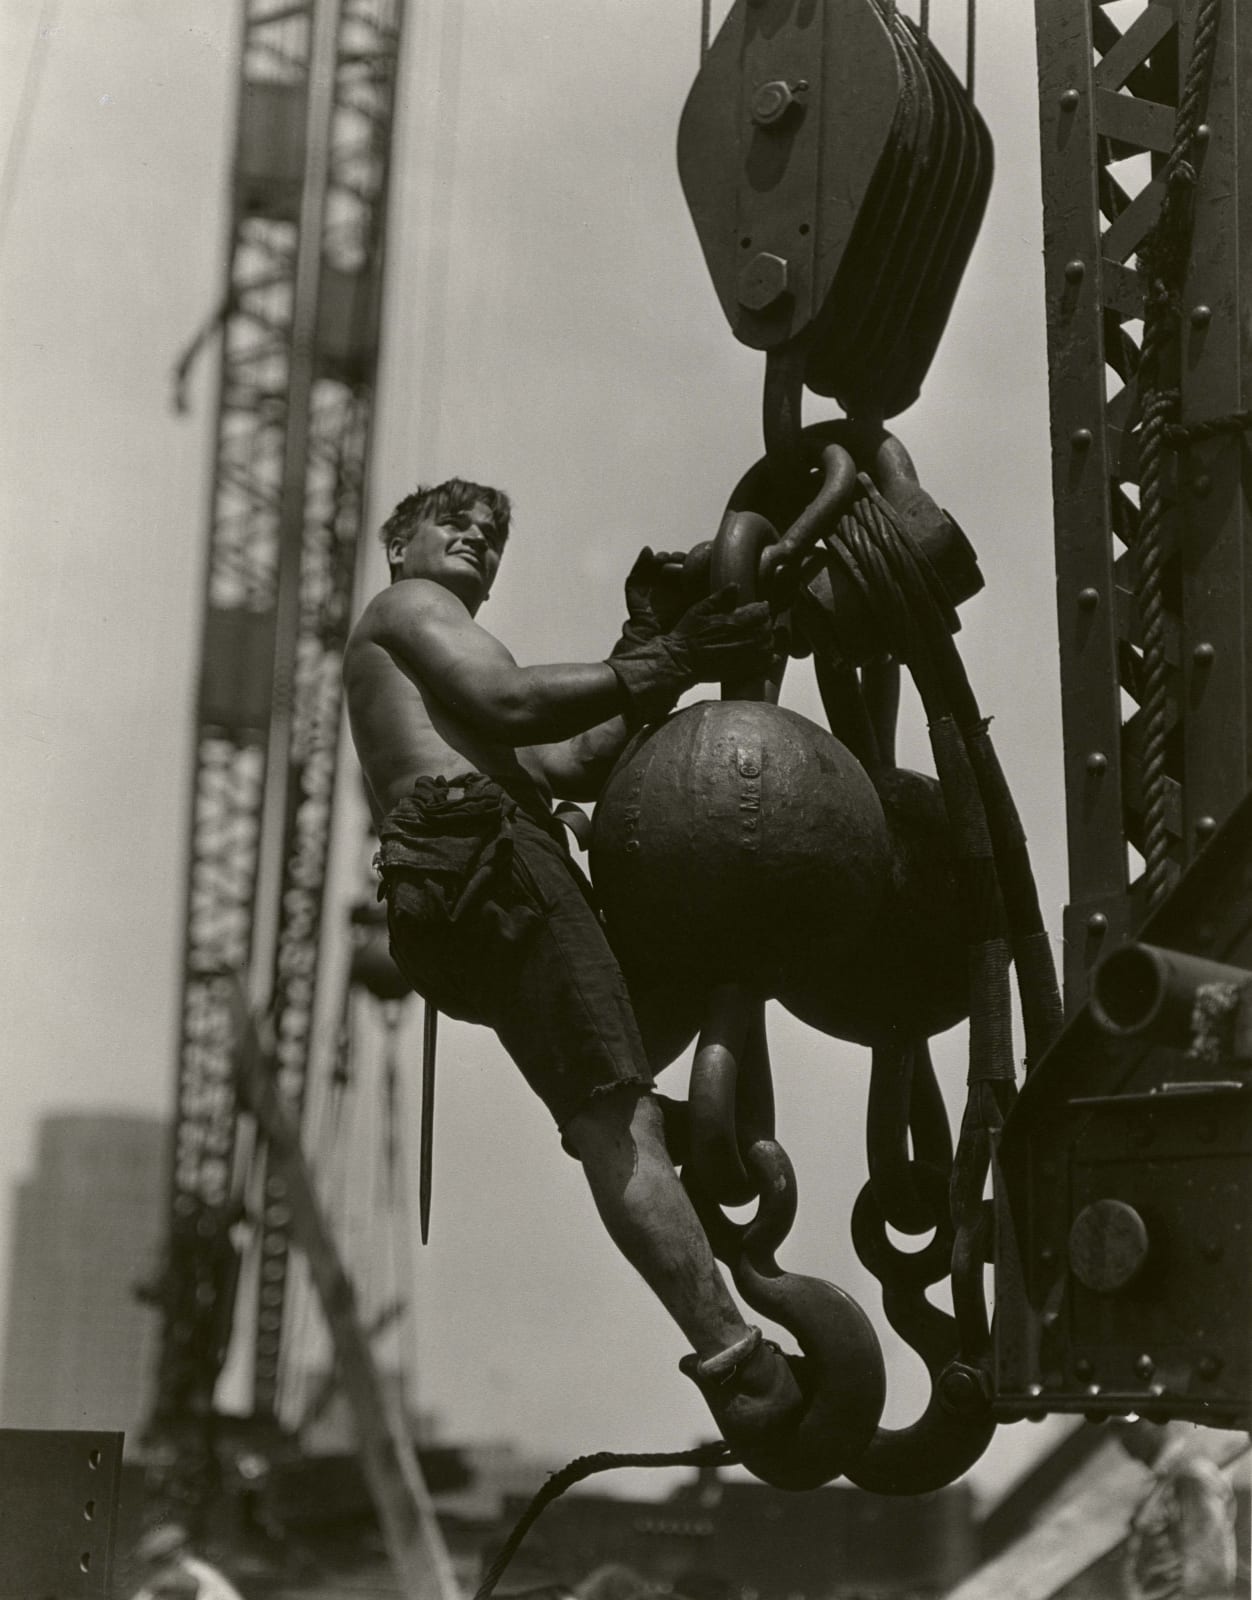 Lewis Hine, Connector on a Hoist, Empire State Building, 1931